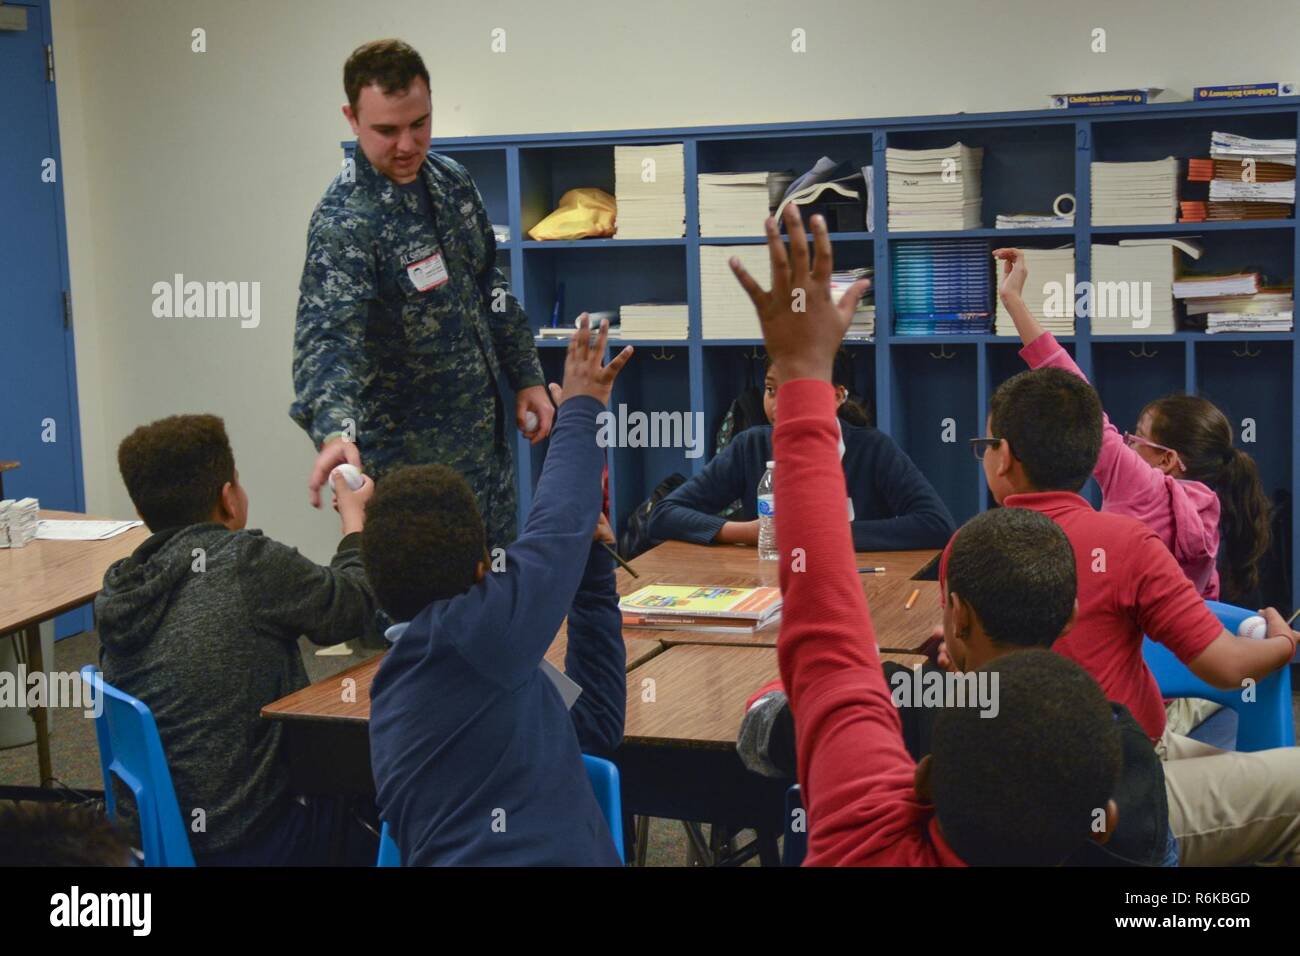 IRVING, Texas (May 19, 2017) Machinist Mate 2nd Class Adam Al Sharif, a recruiter assigned to Navy Recruiting District (NRD) Dallas, answers questions from students at Thomas Haley Elementary School during Career Day. NRD Dallas encompasses 150,000 square miles that includes Northwest Texas and Oklahoma. Stock Photo